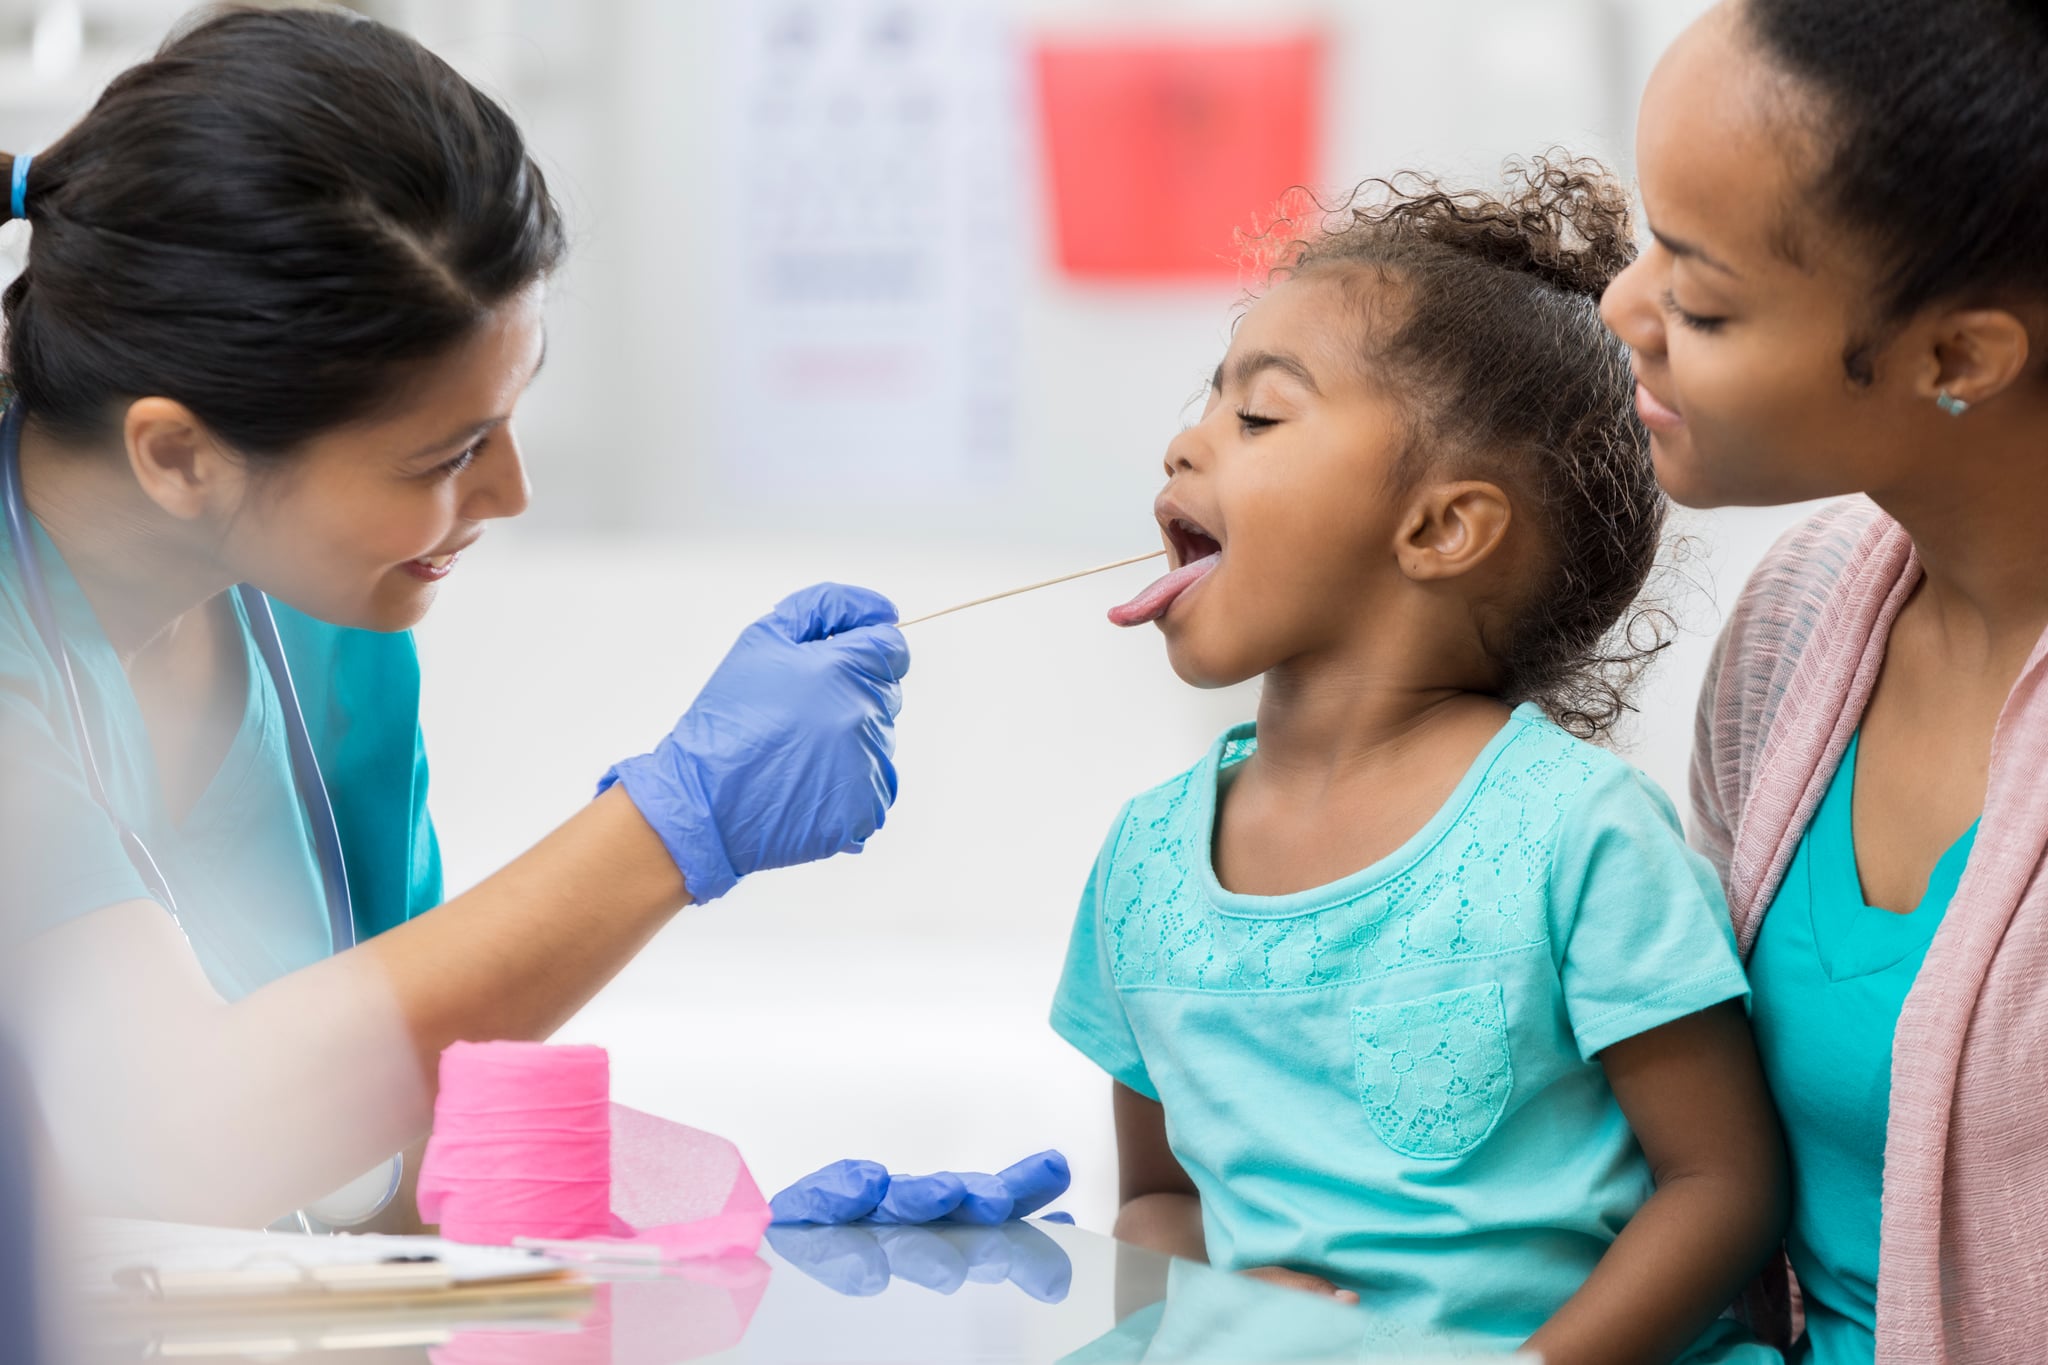 A brave little preschool age girl sits in her mother's lap at a table in the doctor's office.  She opens her mouth wide for the nurse to swab her throat to check for strep.